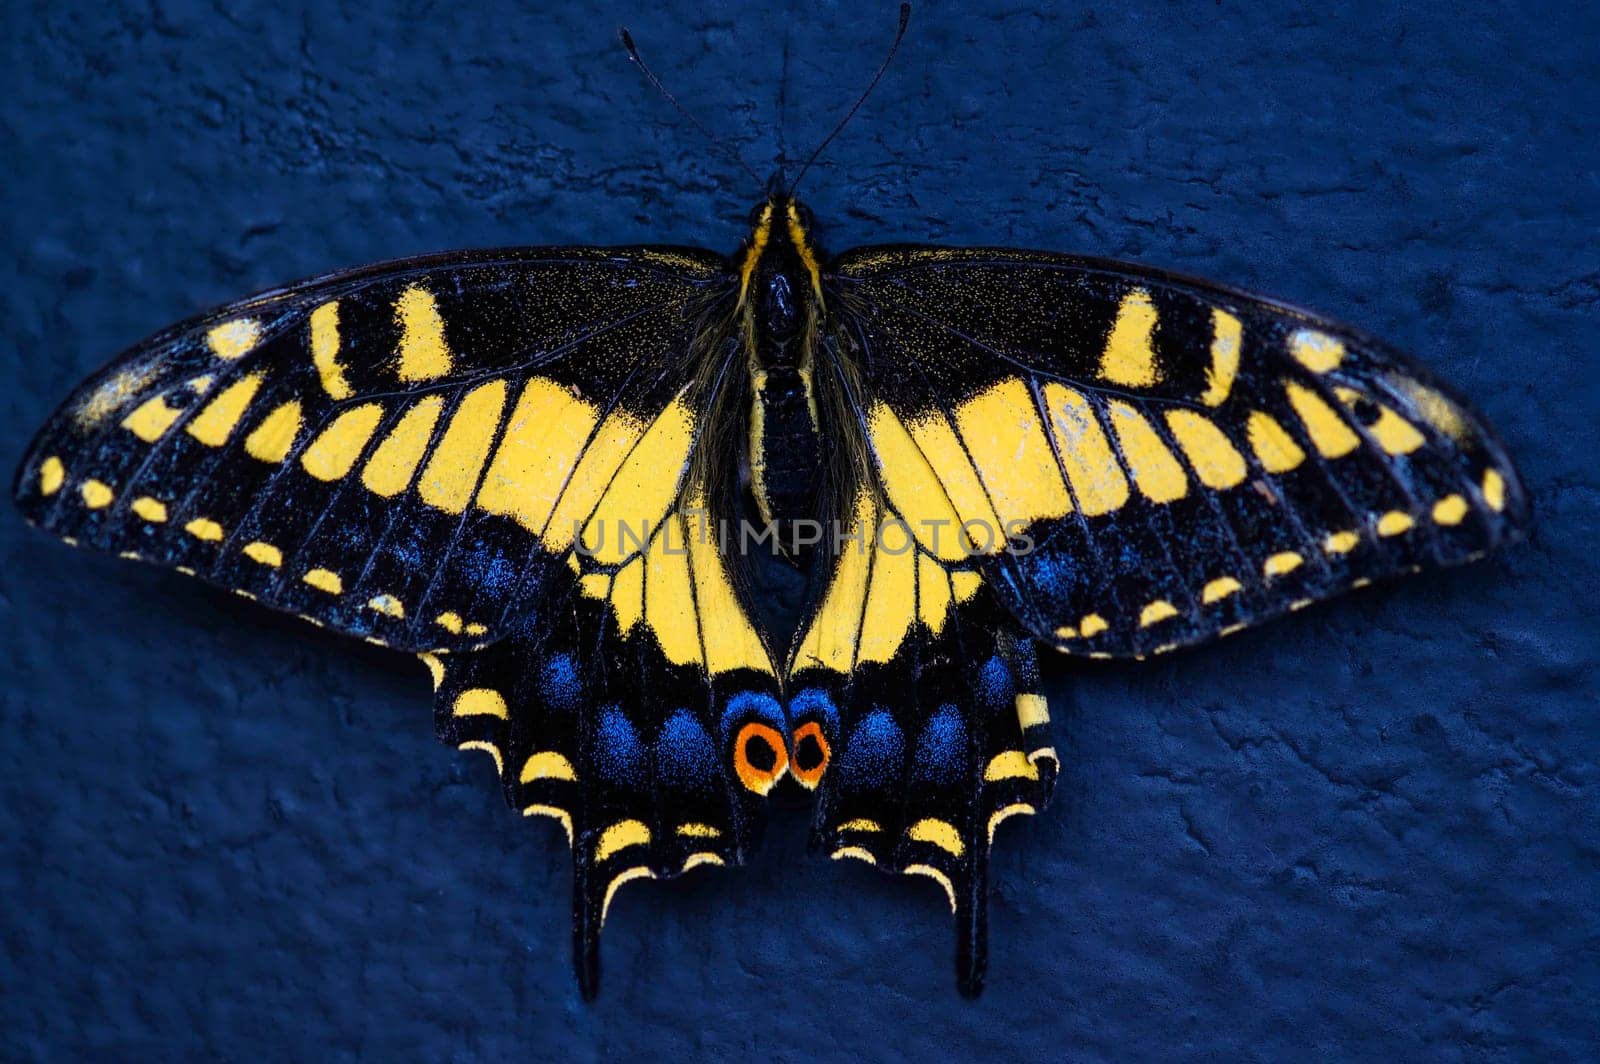 Anise Swallowtail Butterfly, Papilio zelicaon, Closeup, Baja California by RobertPB